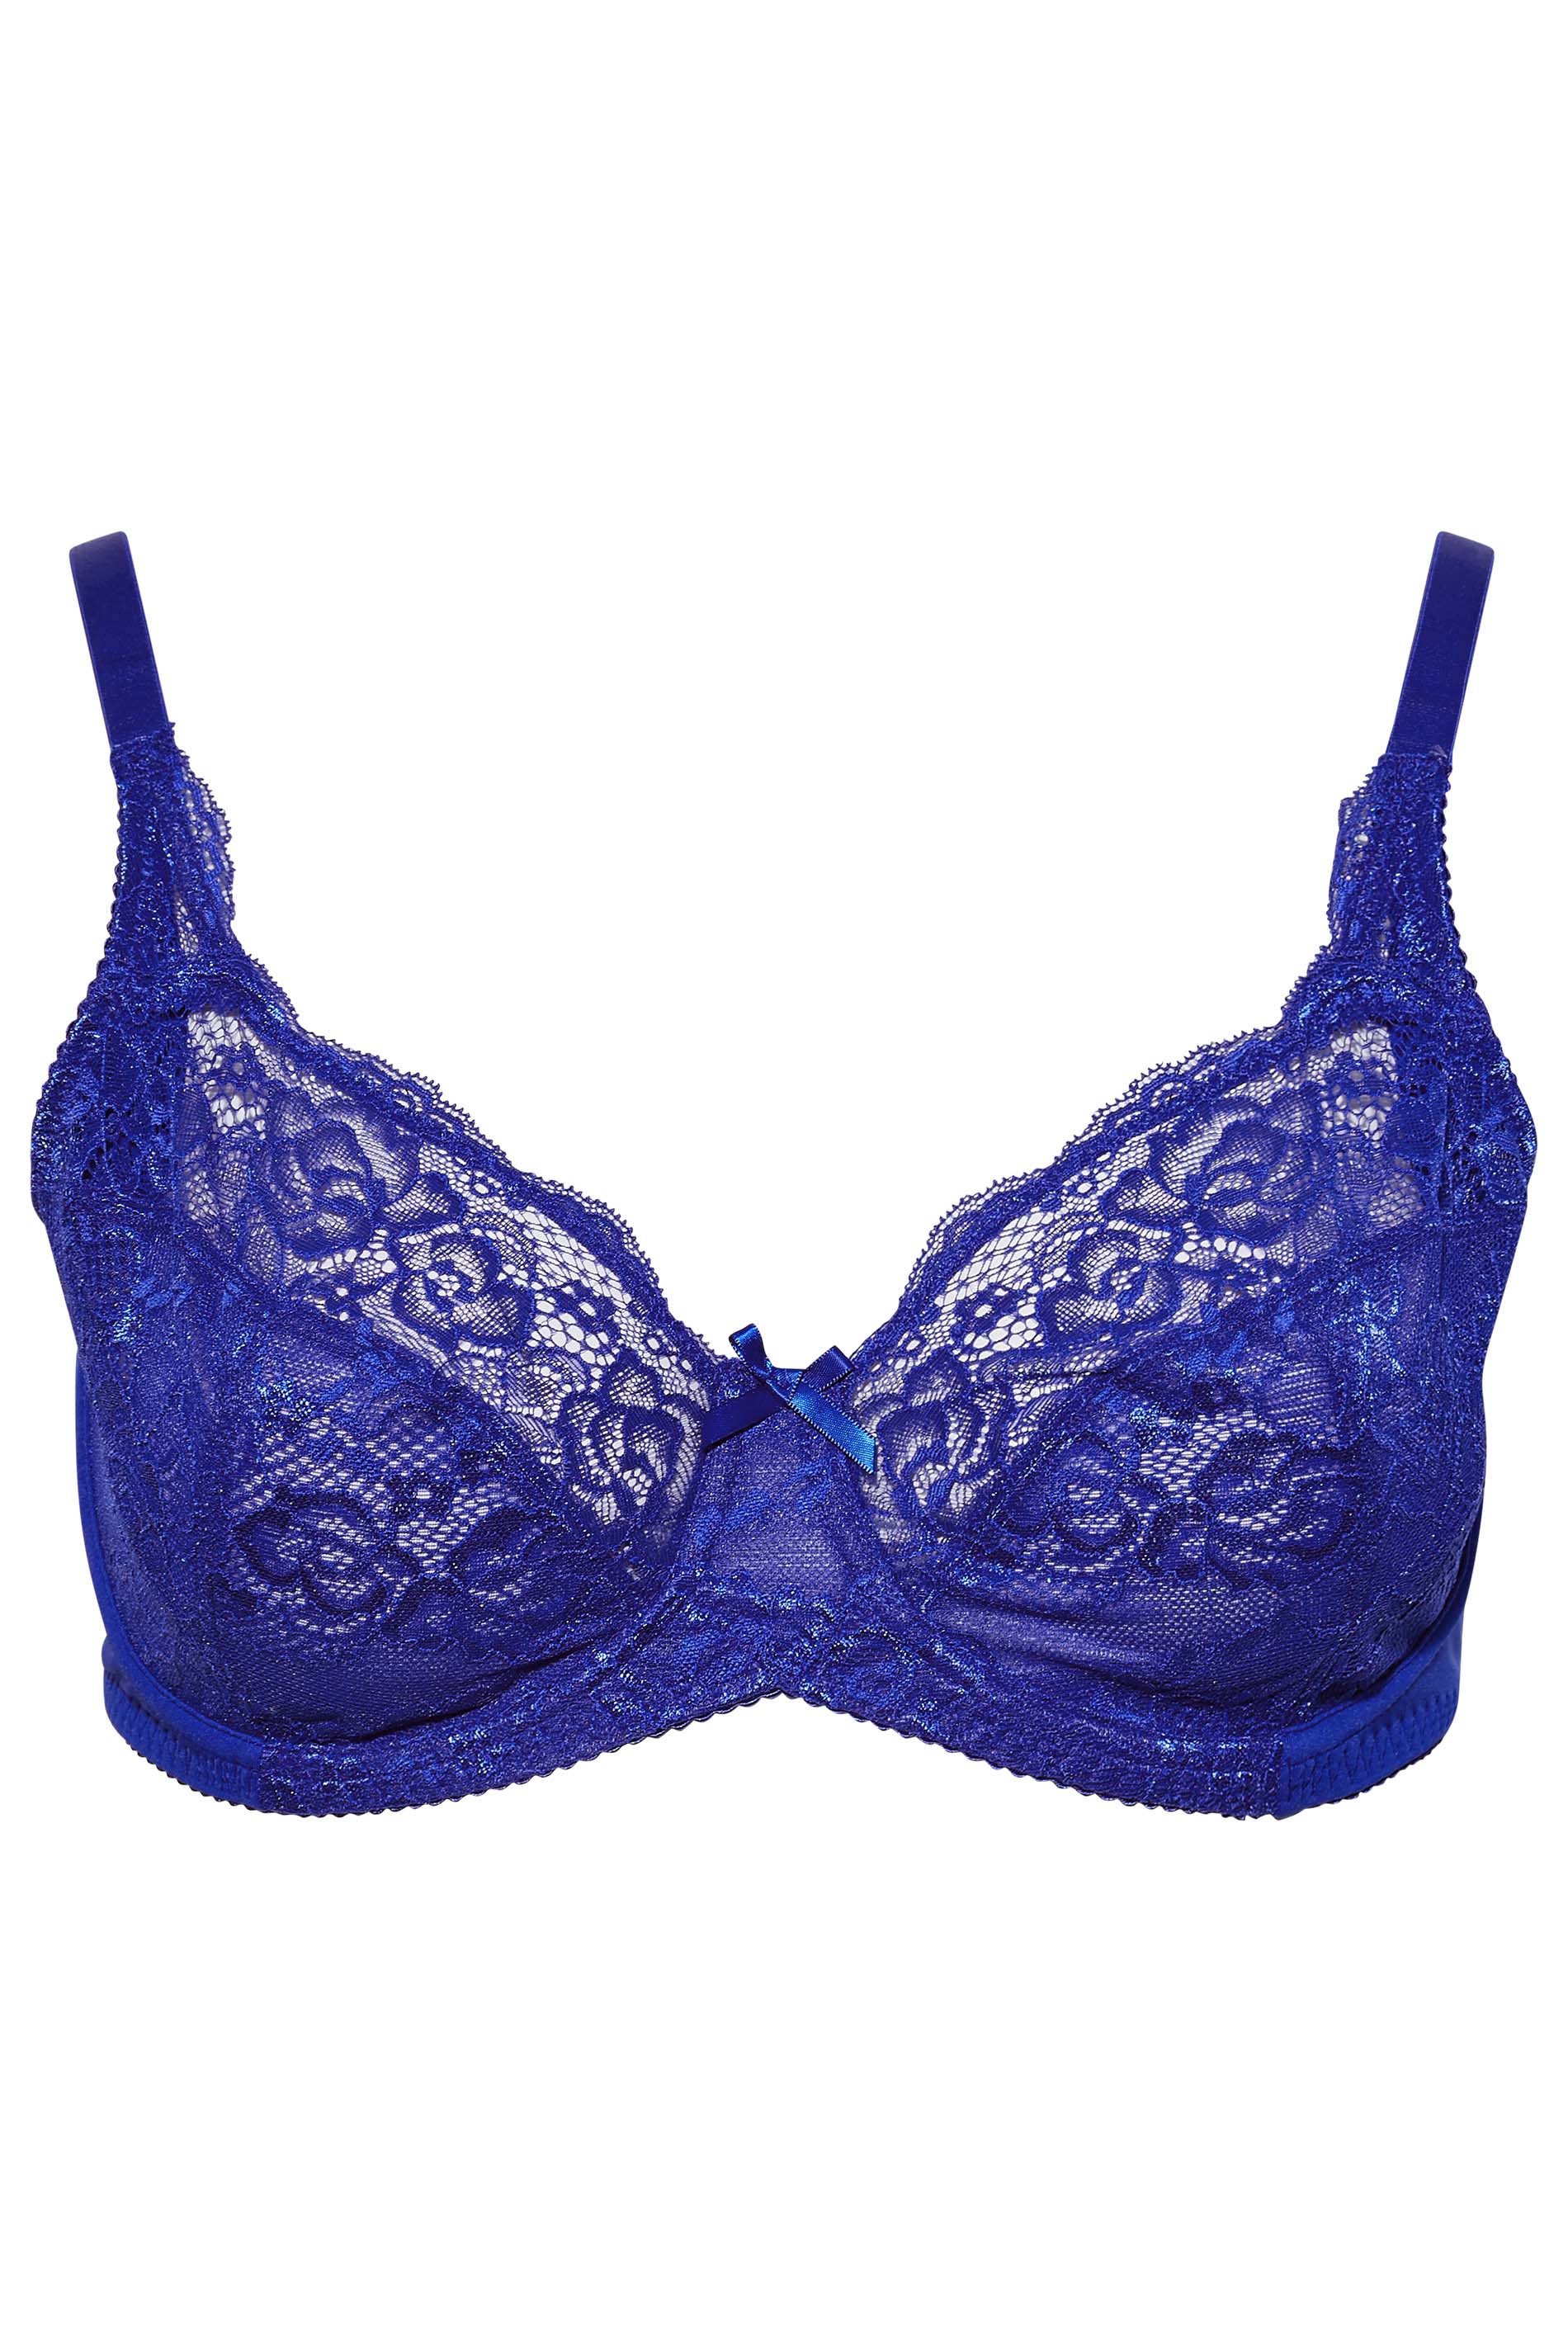 Cobalt Blue Stretch Lace Non-Padded Underwired Balcony Bra